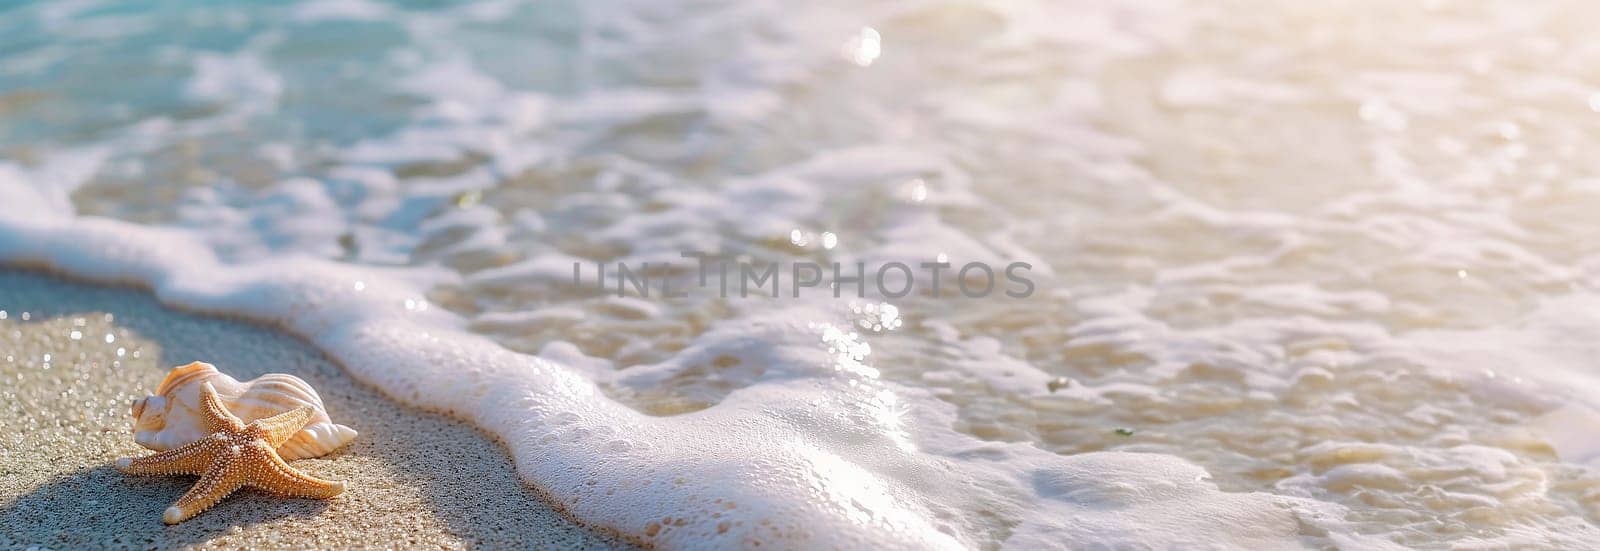 Sea coast with sand, ocean wave, shells and star fish on tropical island. beach with sandy seaside, blue transparent water surface. Paradise island, exotic tropical by Annebel146